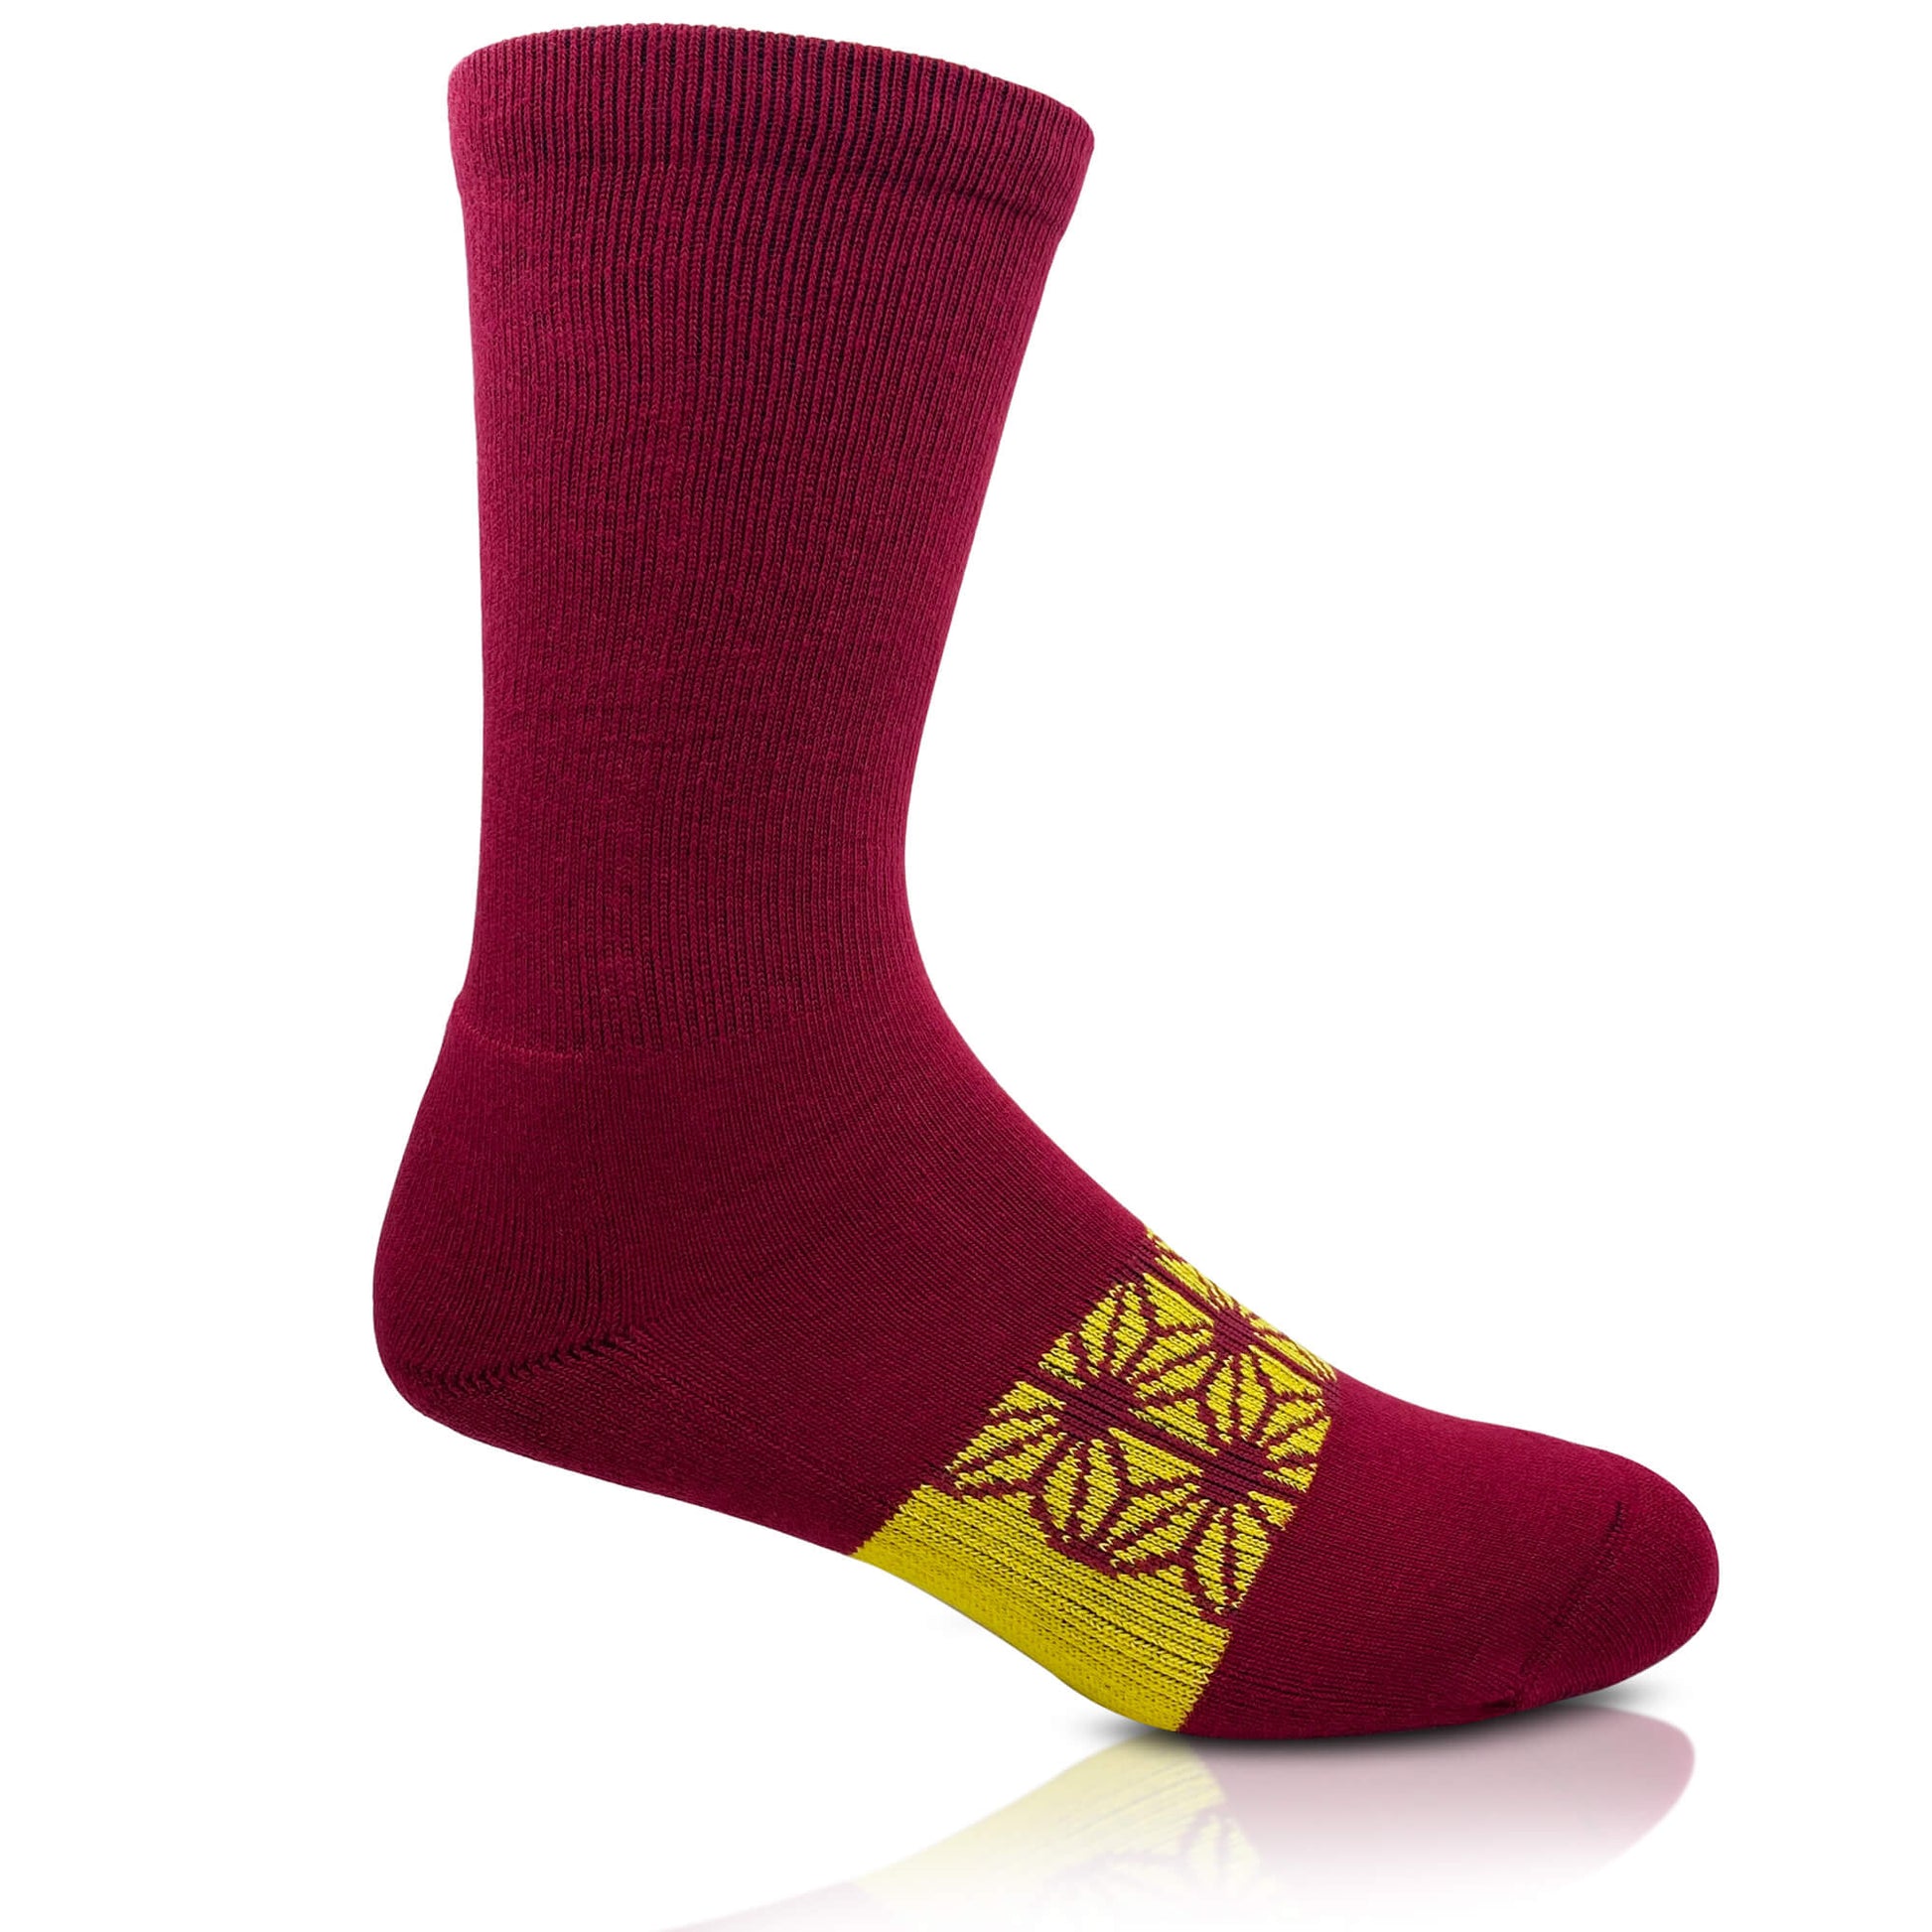 Modern Envy comfy Corn logo crew sock Maroon with Gold side view